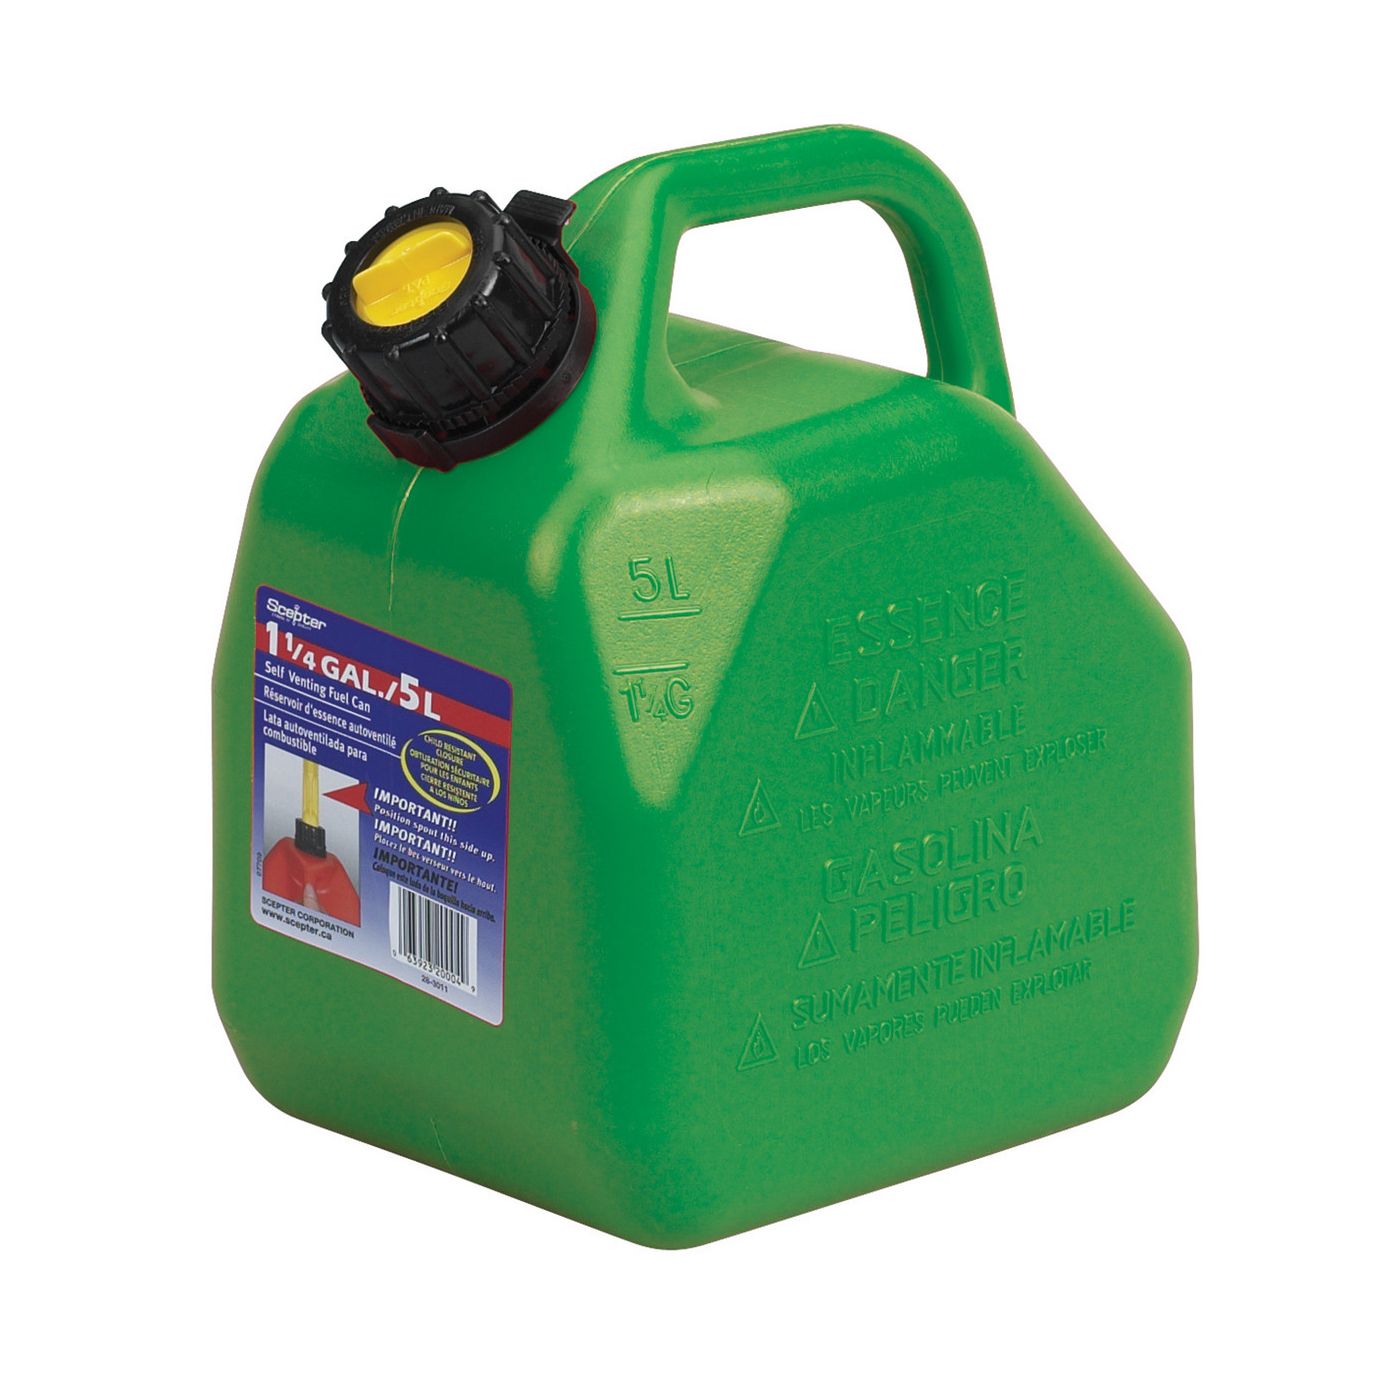 Scpeter 5L Green Plastic 2-Stroke Fuel Jerry Can